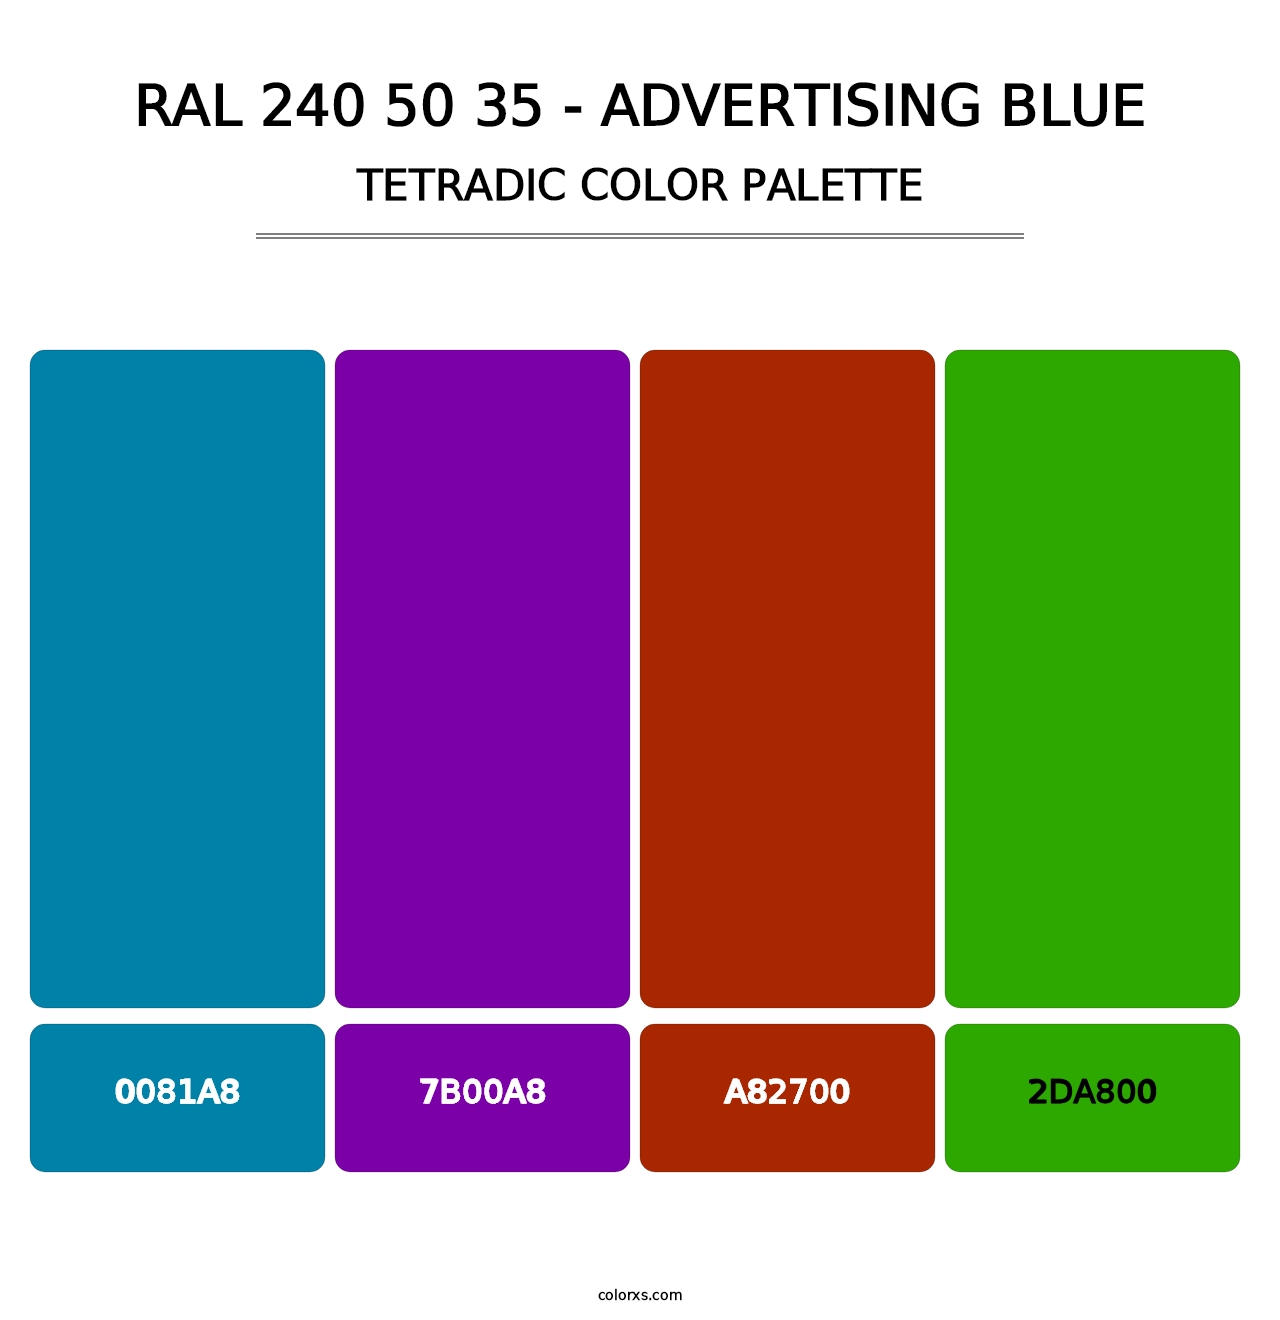 RAL 240 50 35 - Advertising Blue - Tetradic Color Palette